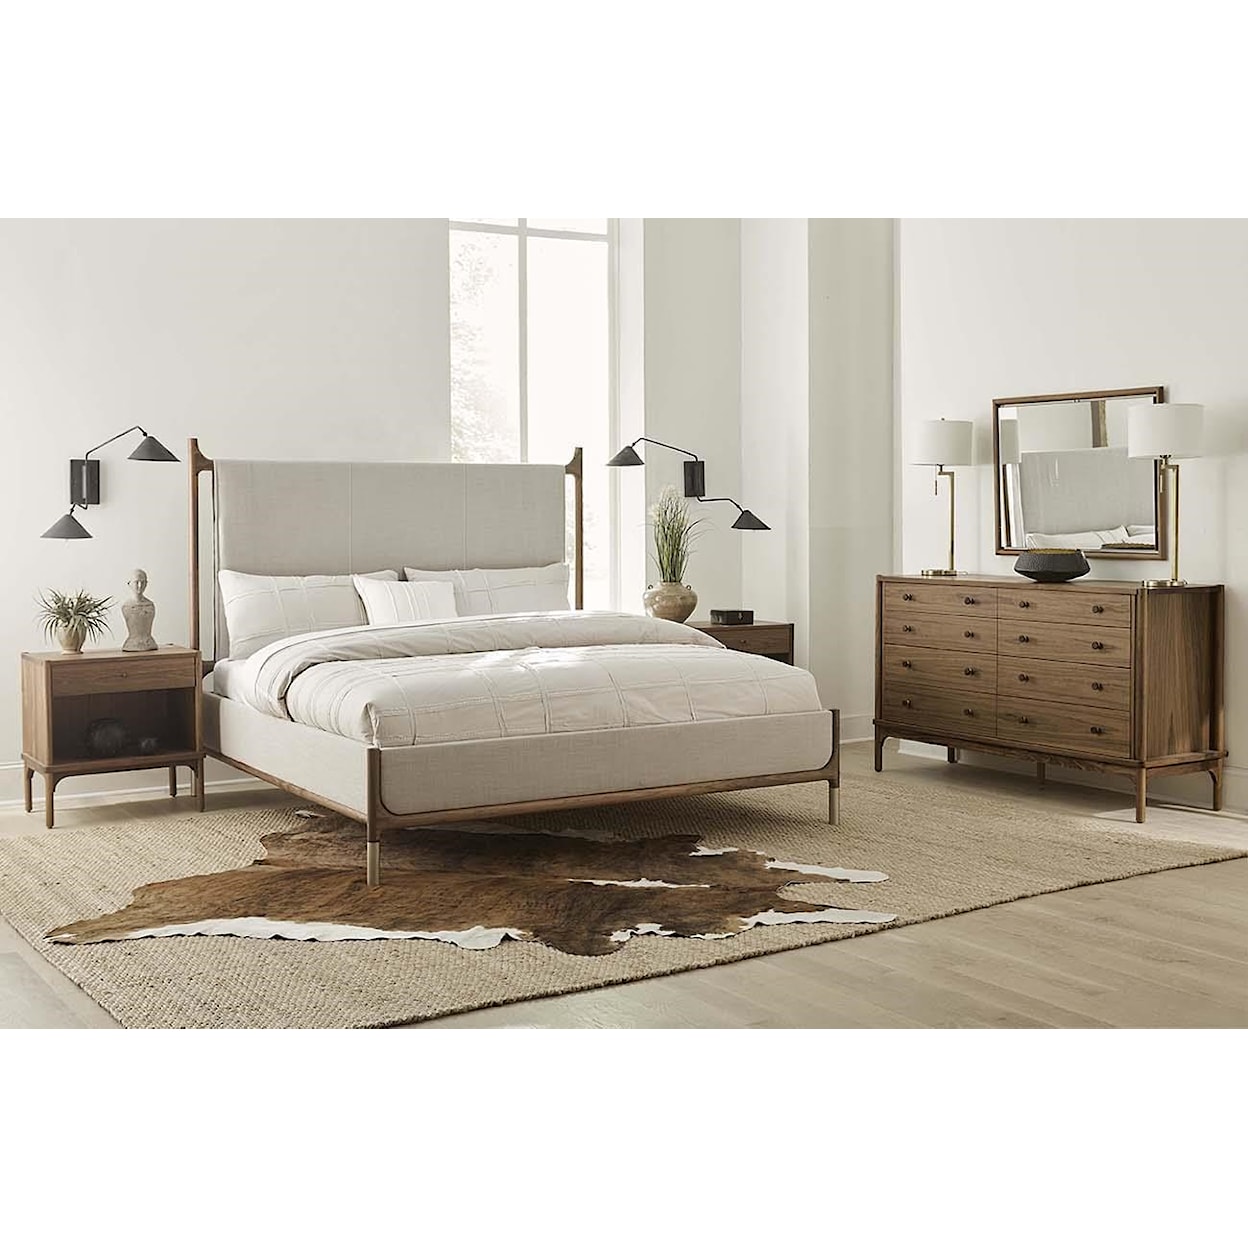 Stickley Walnut Grove California King Leather Upholstered Bed